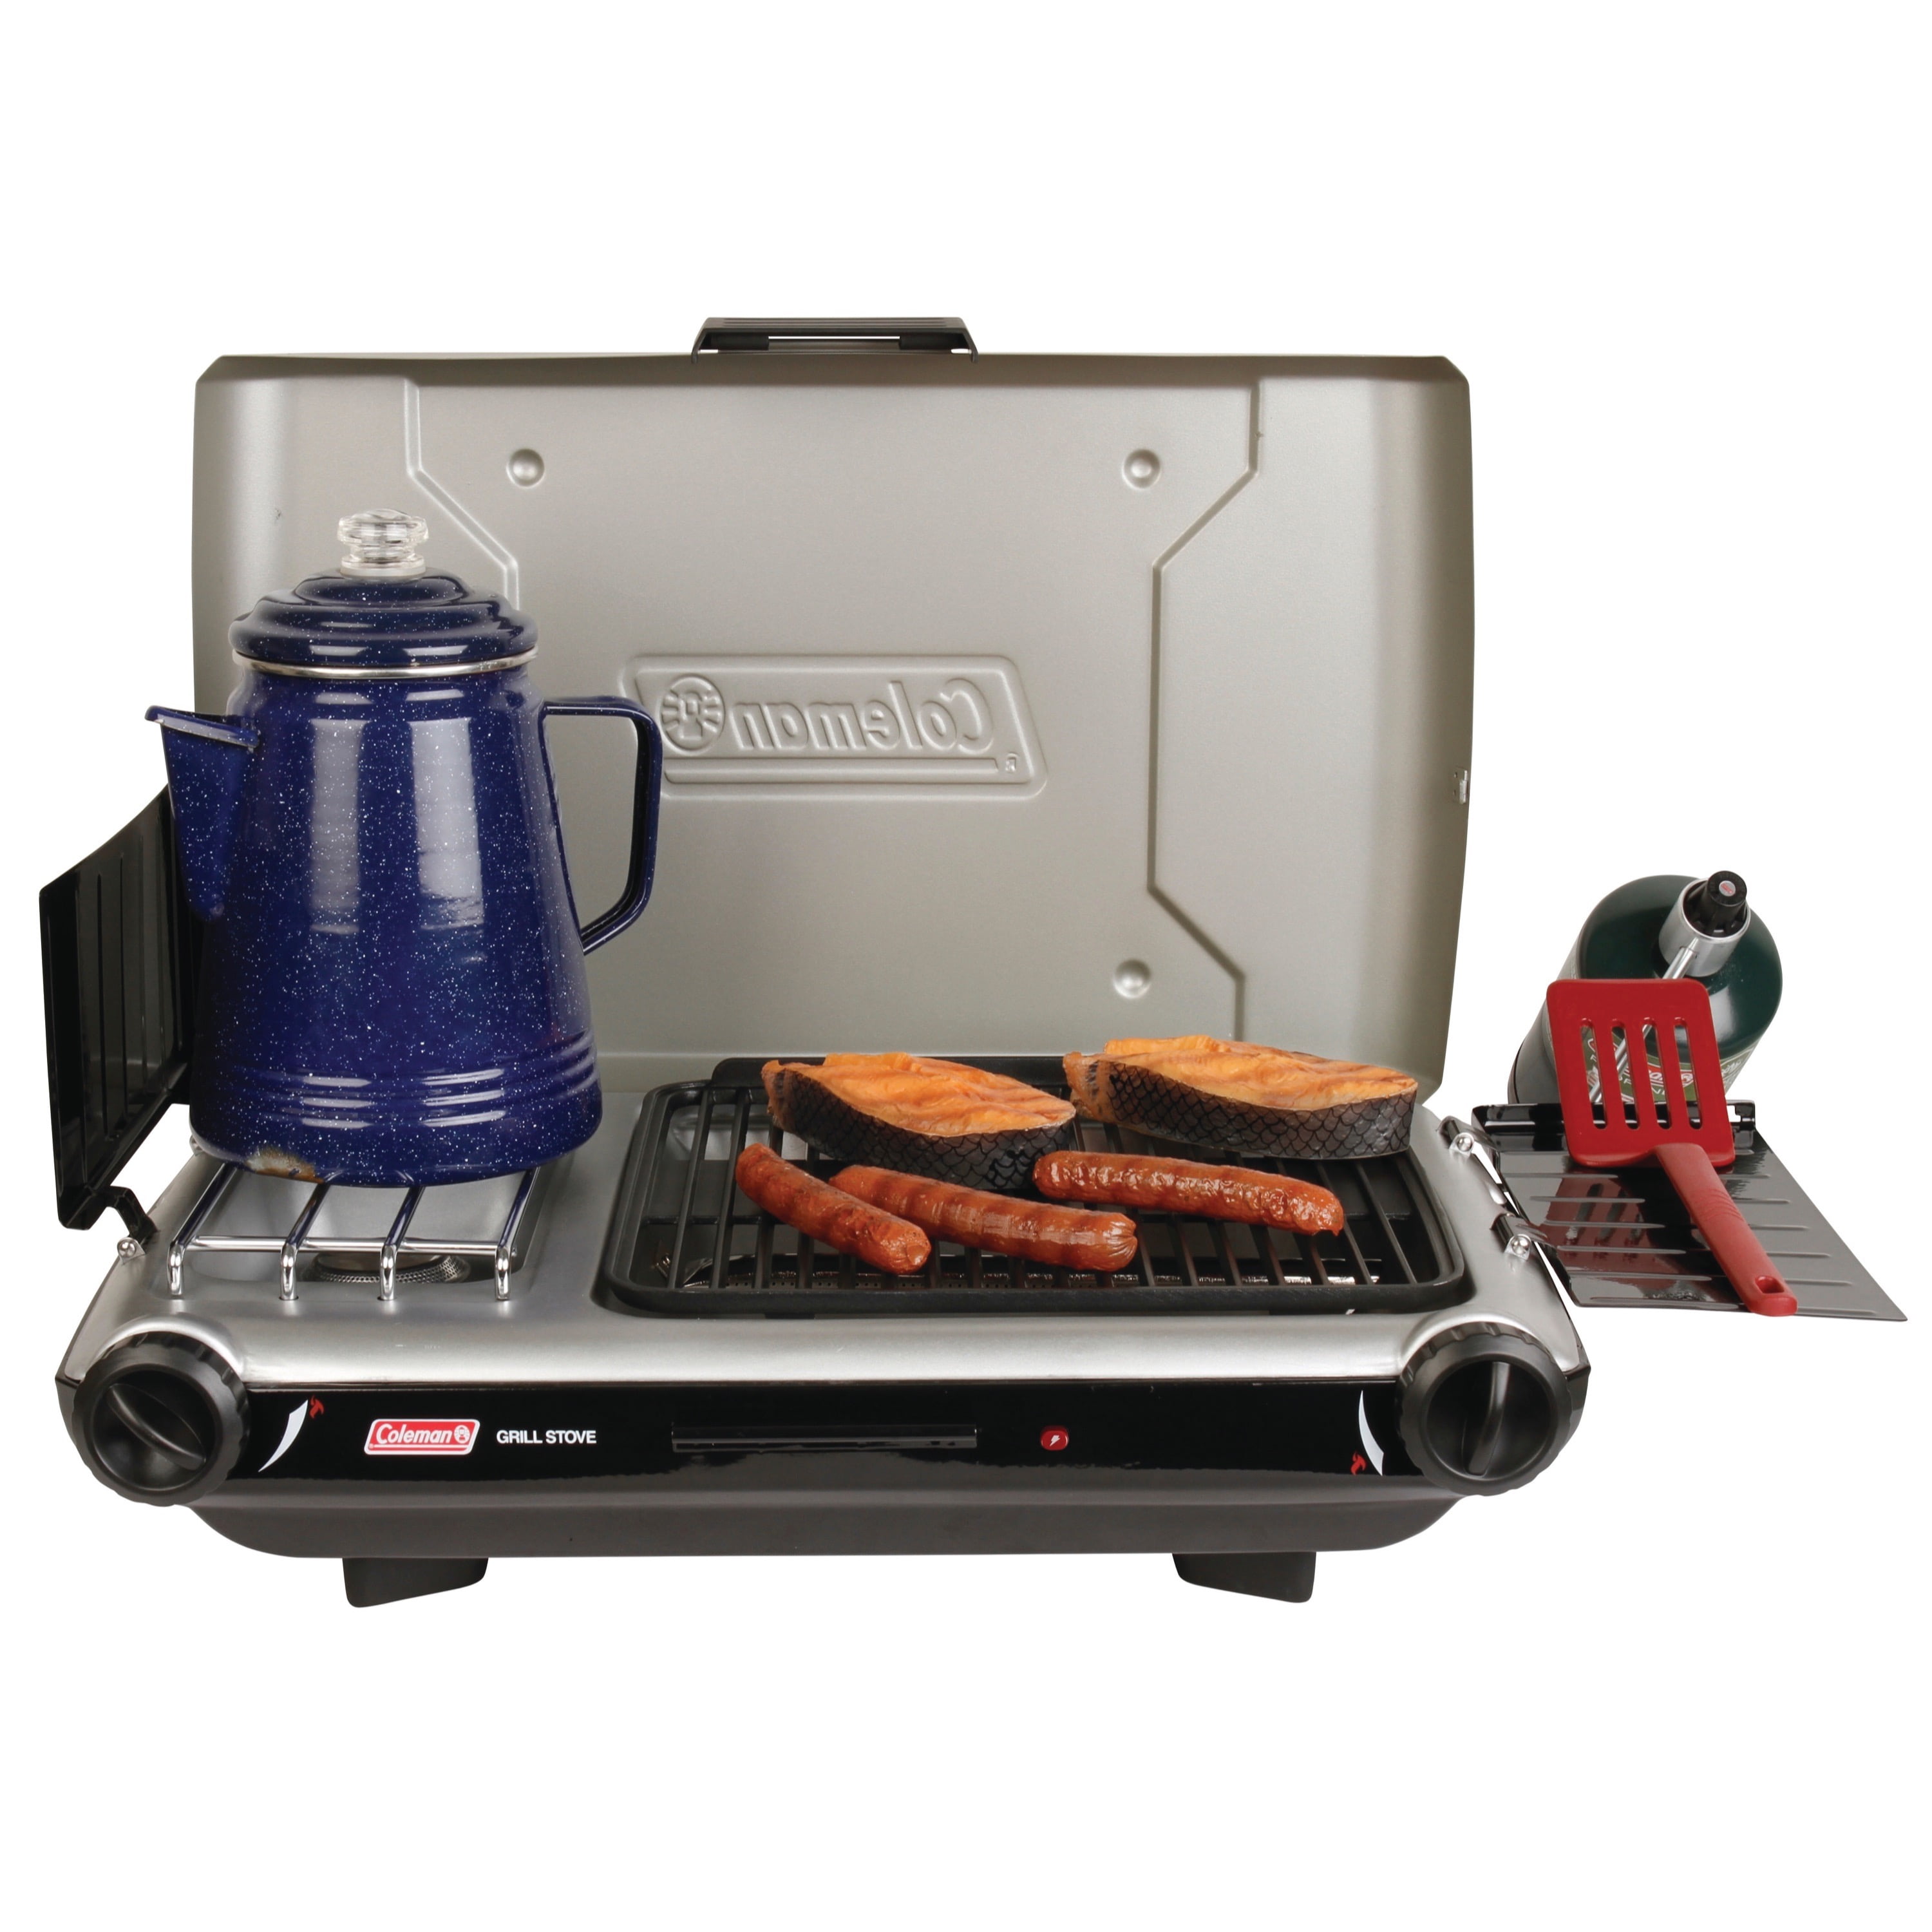 Classic 2-in-1 Camping Grill/Stove